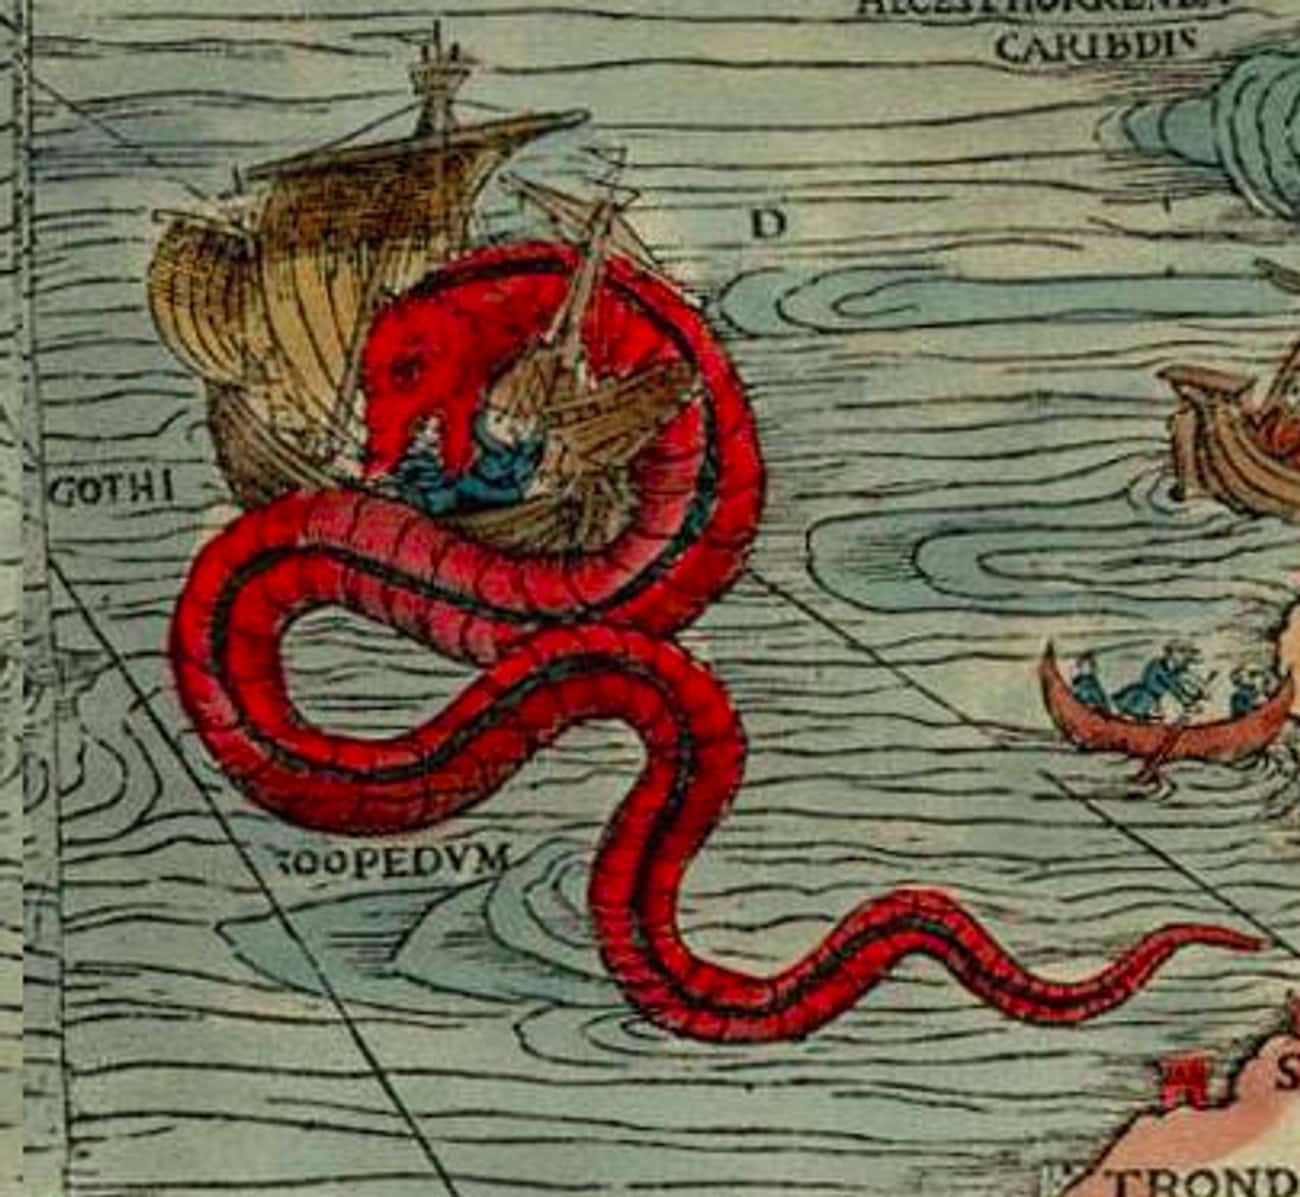 The 200-Foot Long Sea Serpent That Could Crush Ships